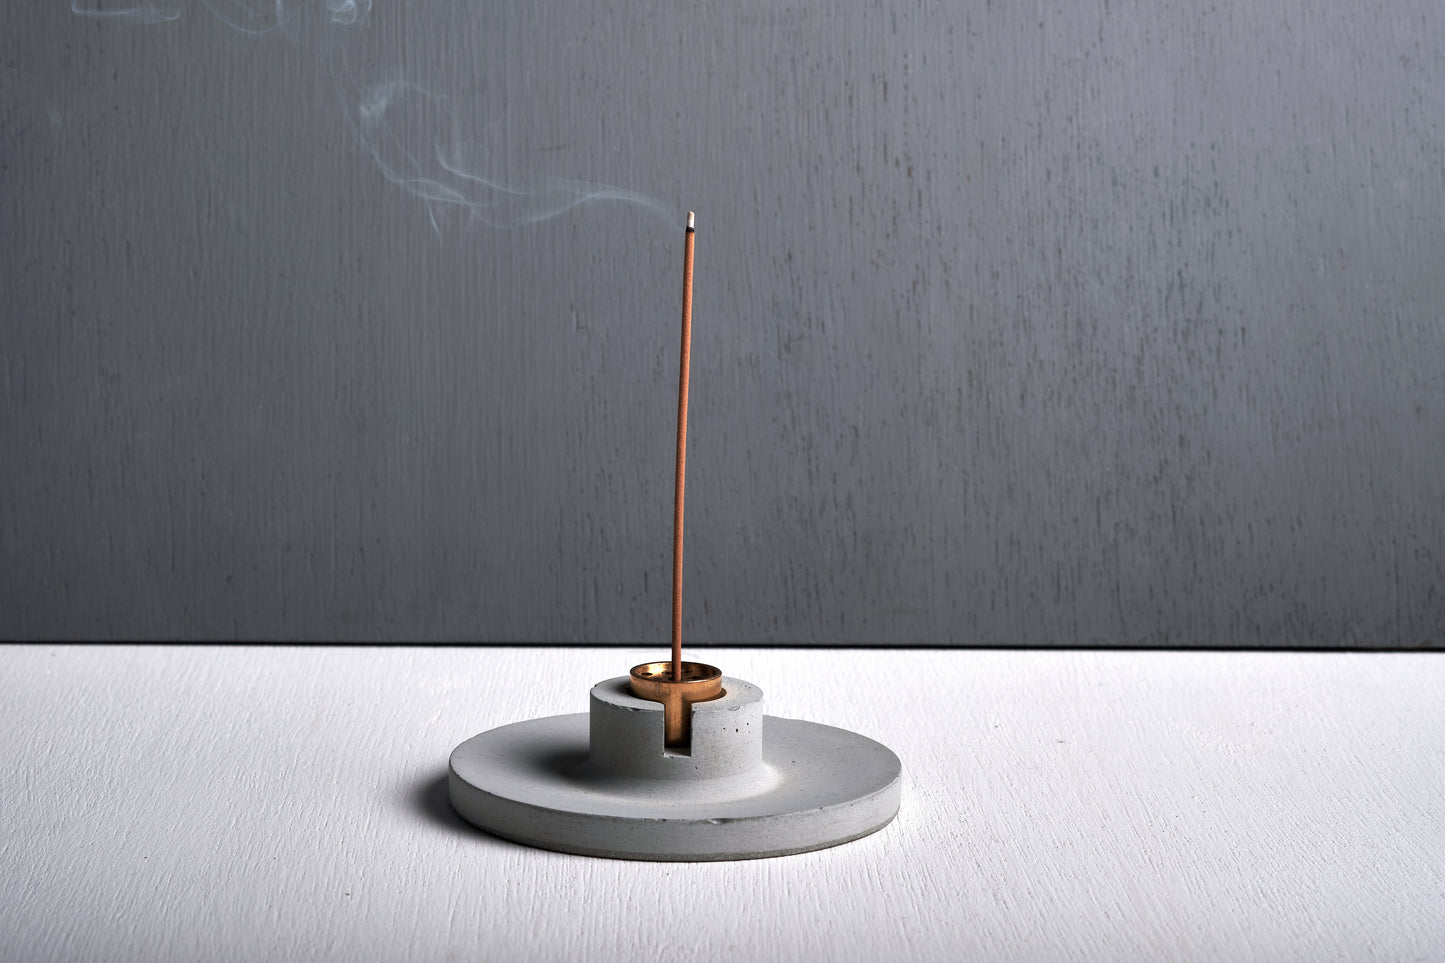 Concrete incense stick holder with brass (disc) - "grey"